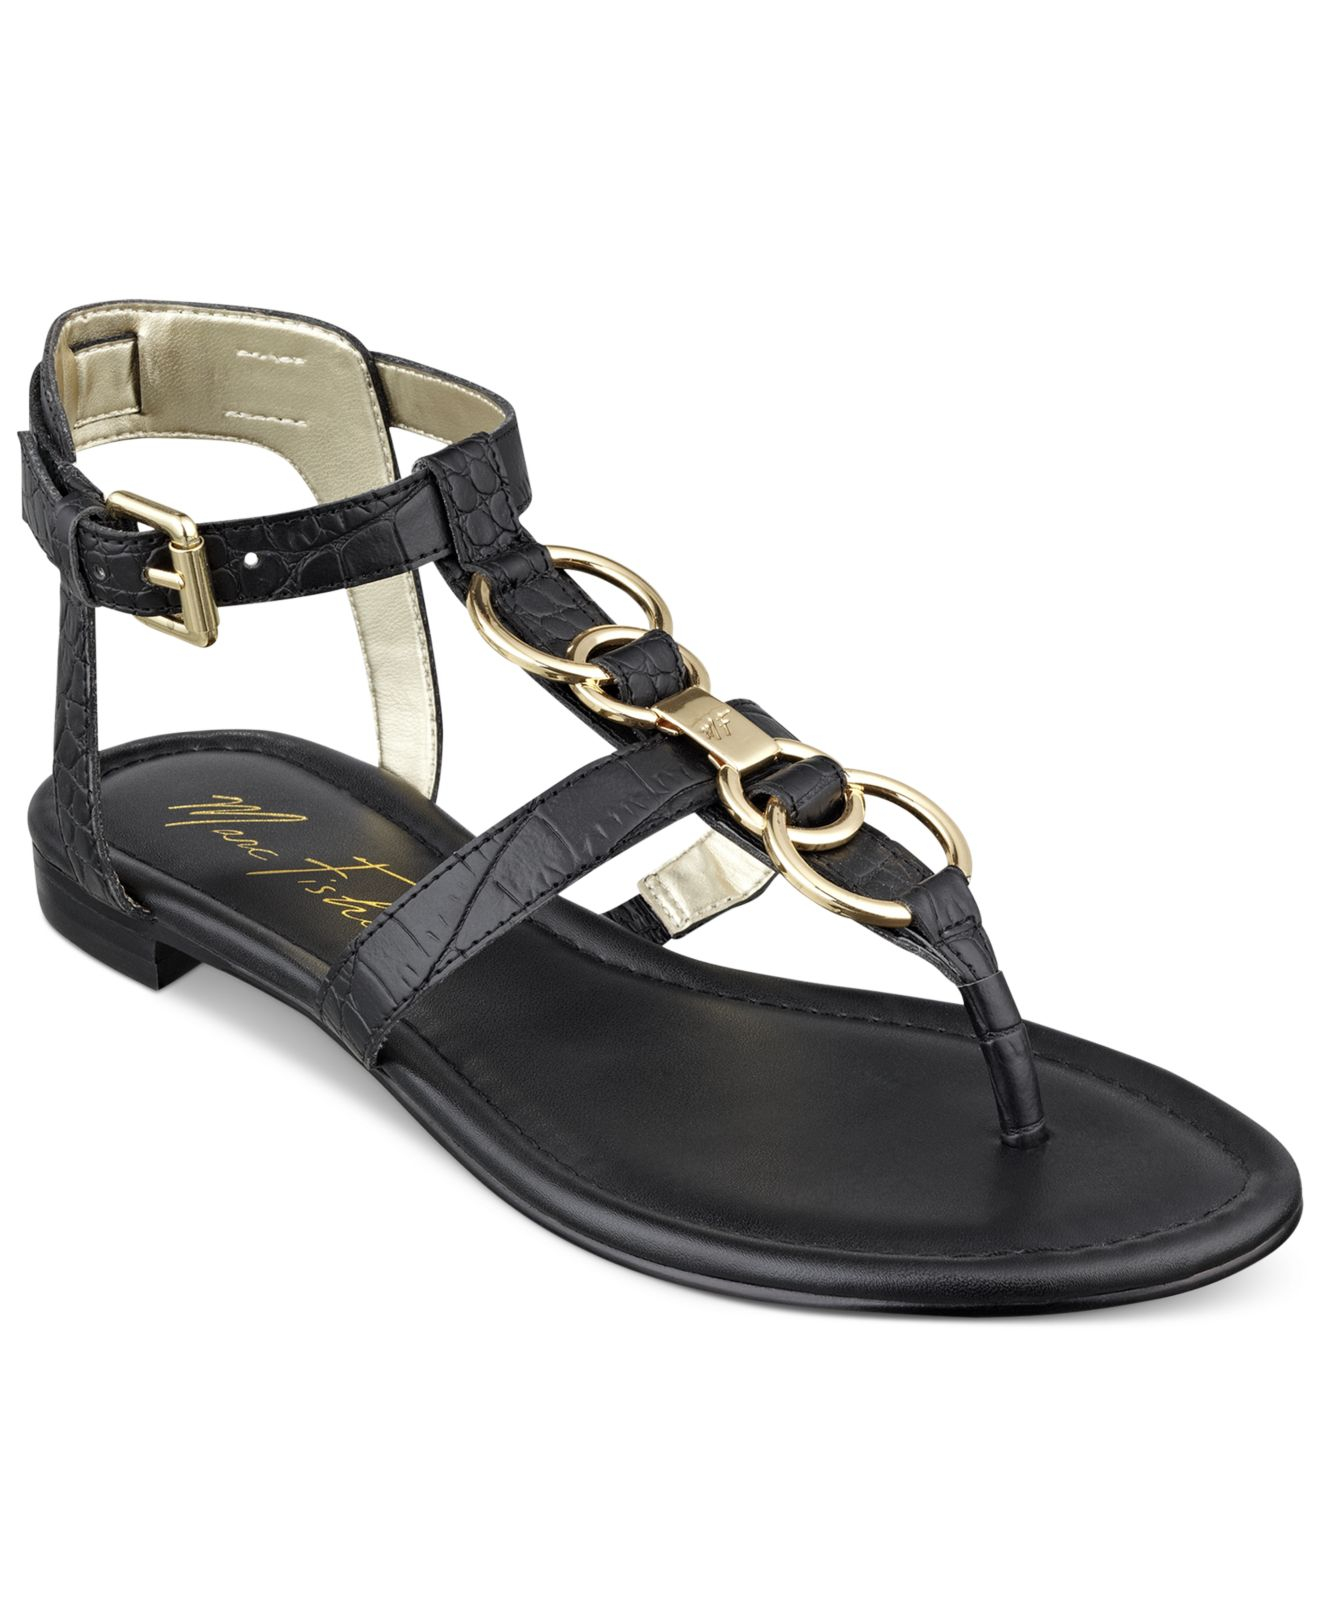 Marc Fisher Palyna T-Strap Thong Sandals in Black - Lyst